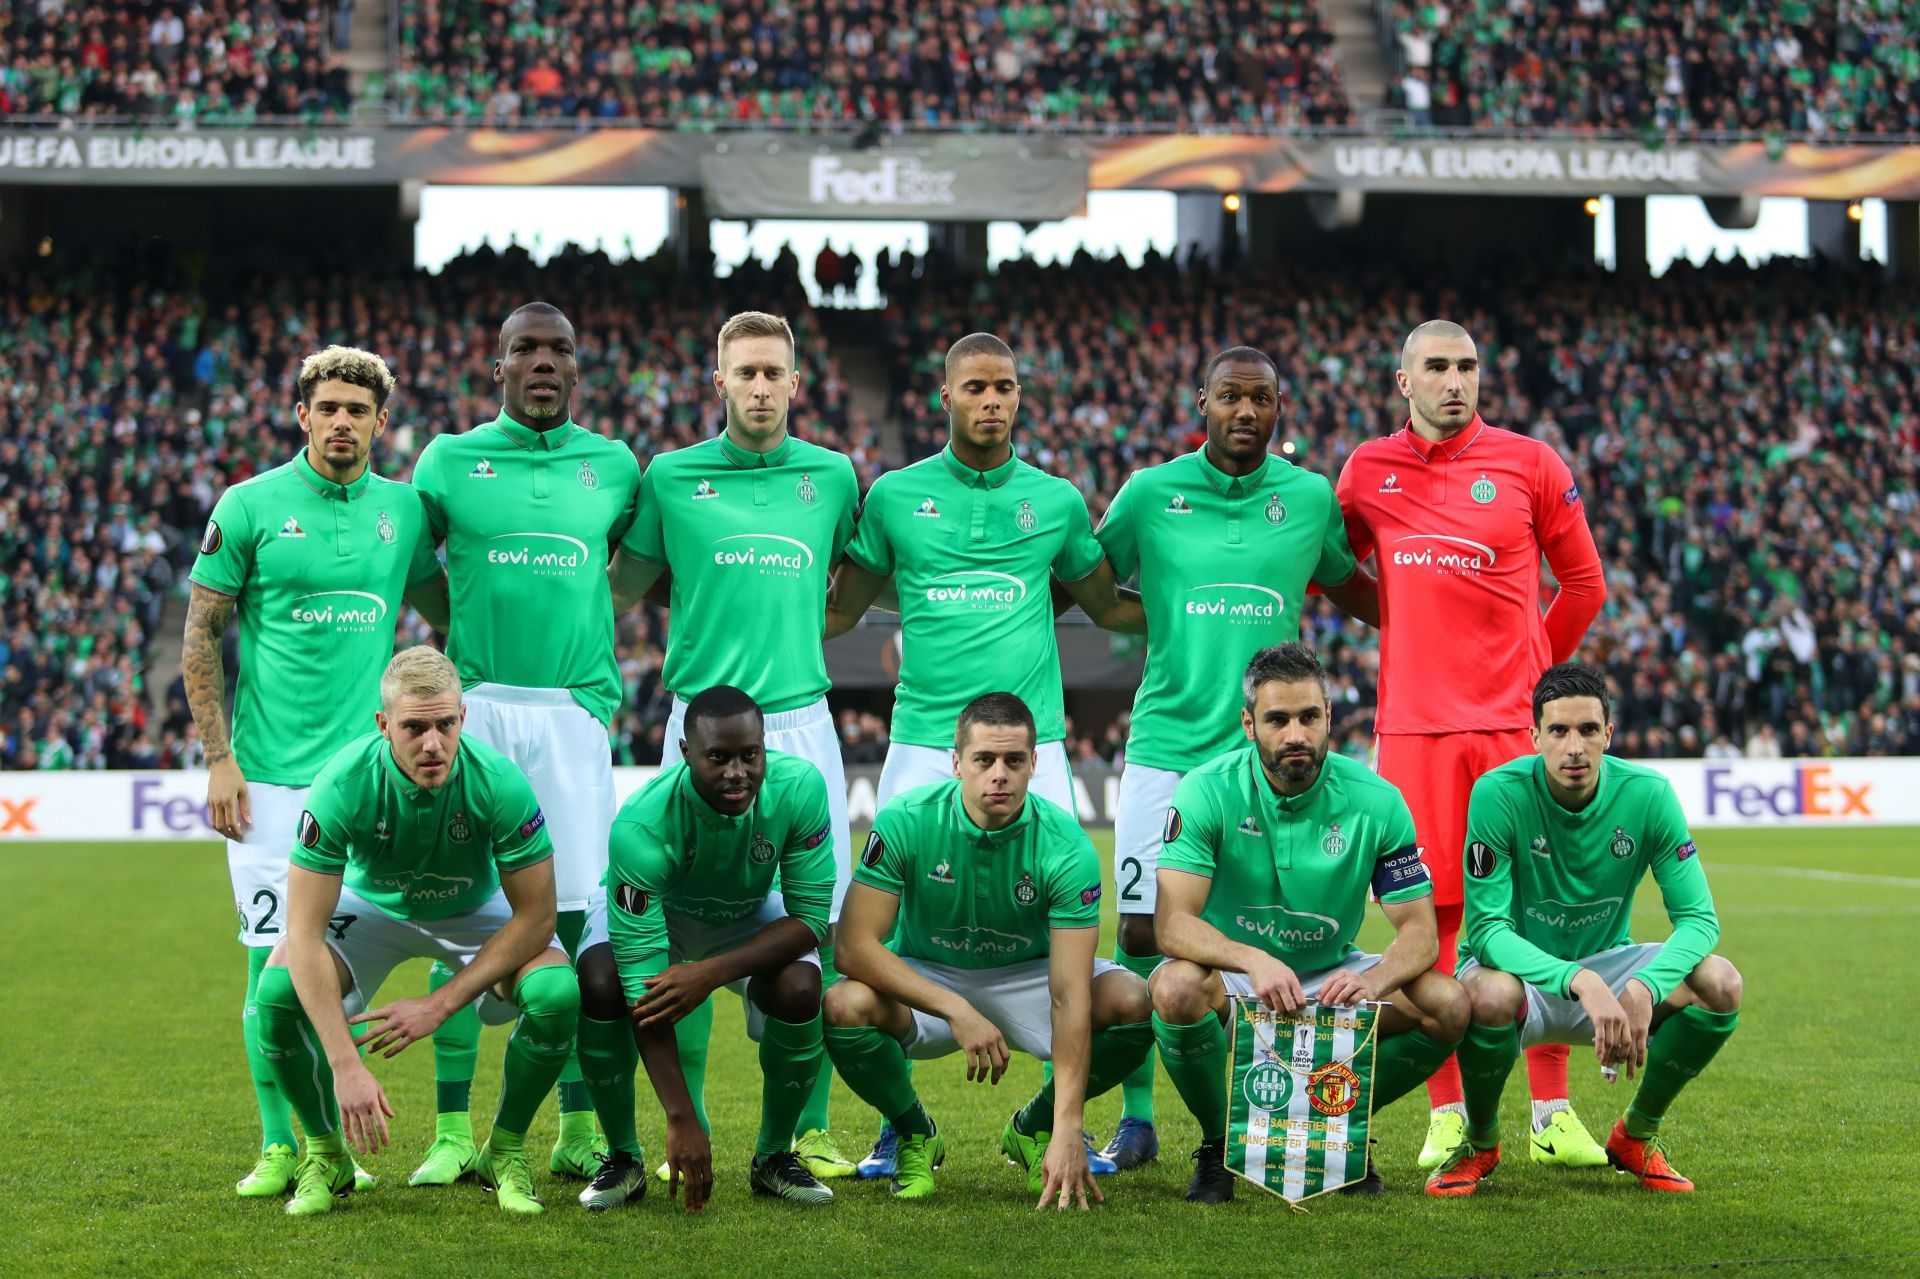 Saint-Etienne have been in Ligue 1 for 18 consecutive years, but that status could soon change